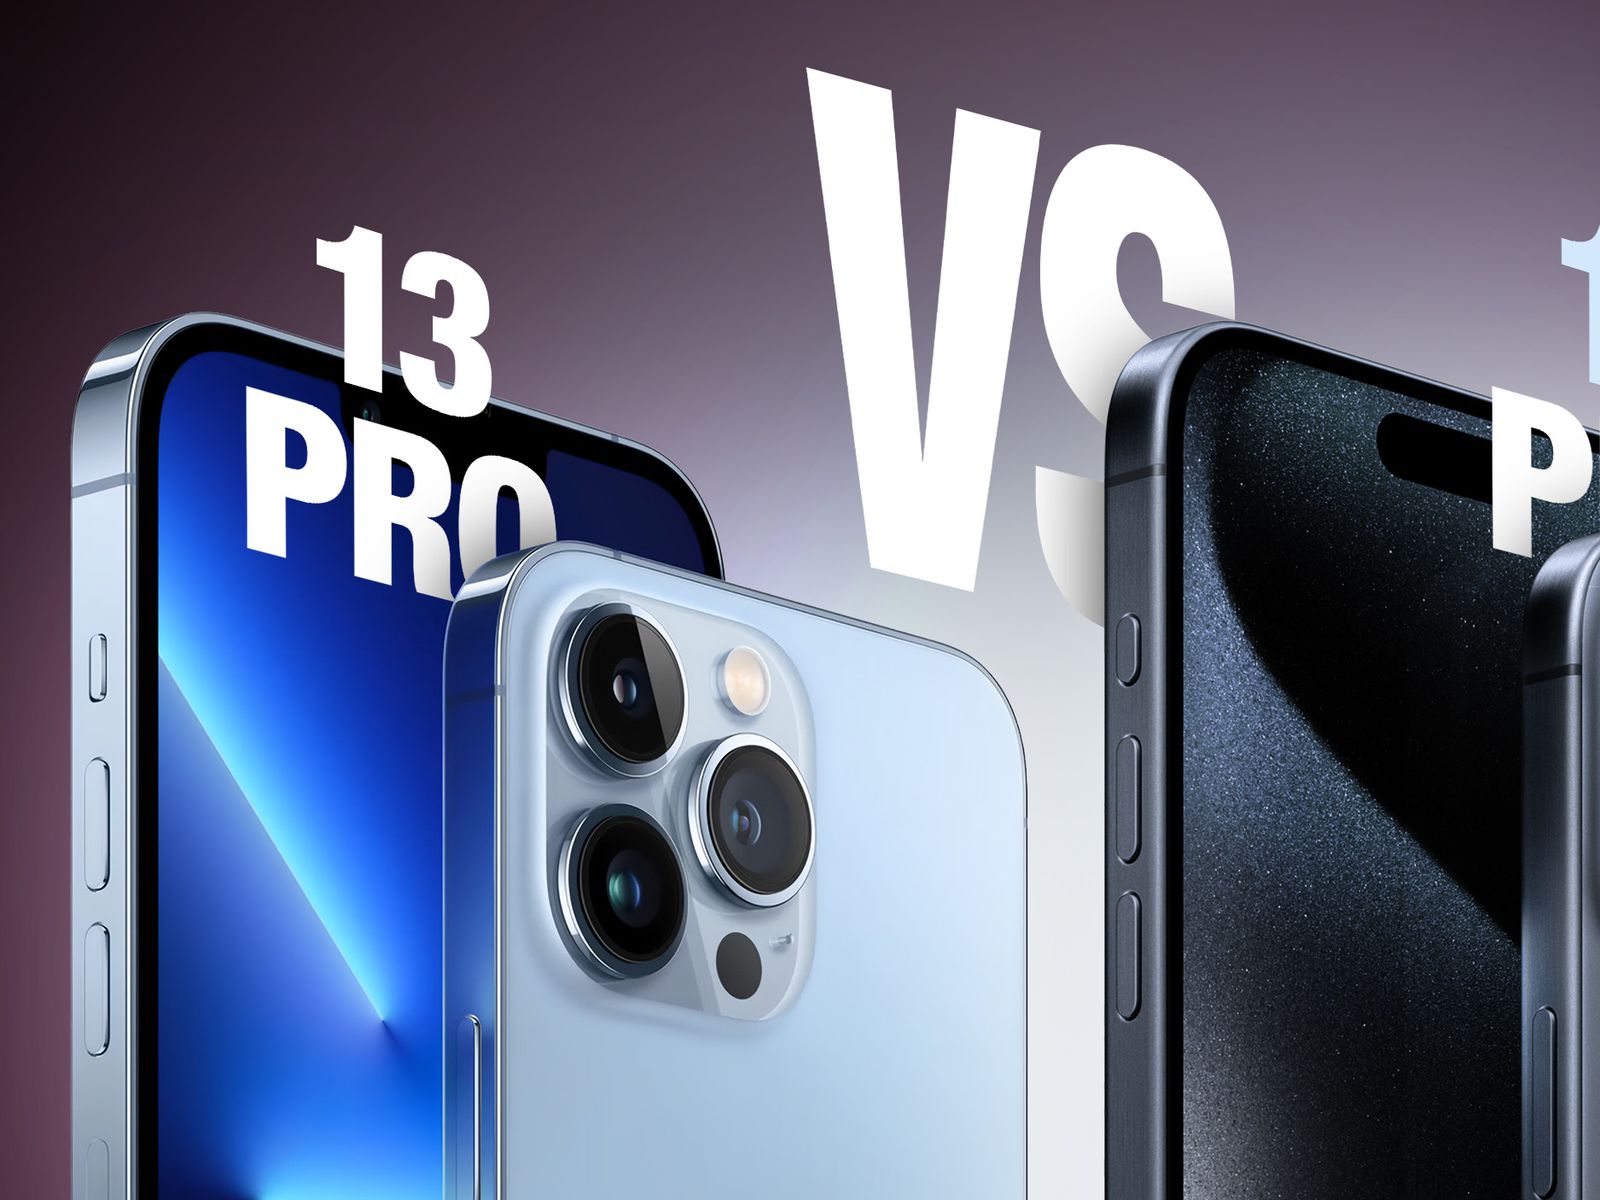 Shooting 4K ProRes Video Requires iPhone 13 Pro With at Least 256GB Storage  - MacRumors